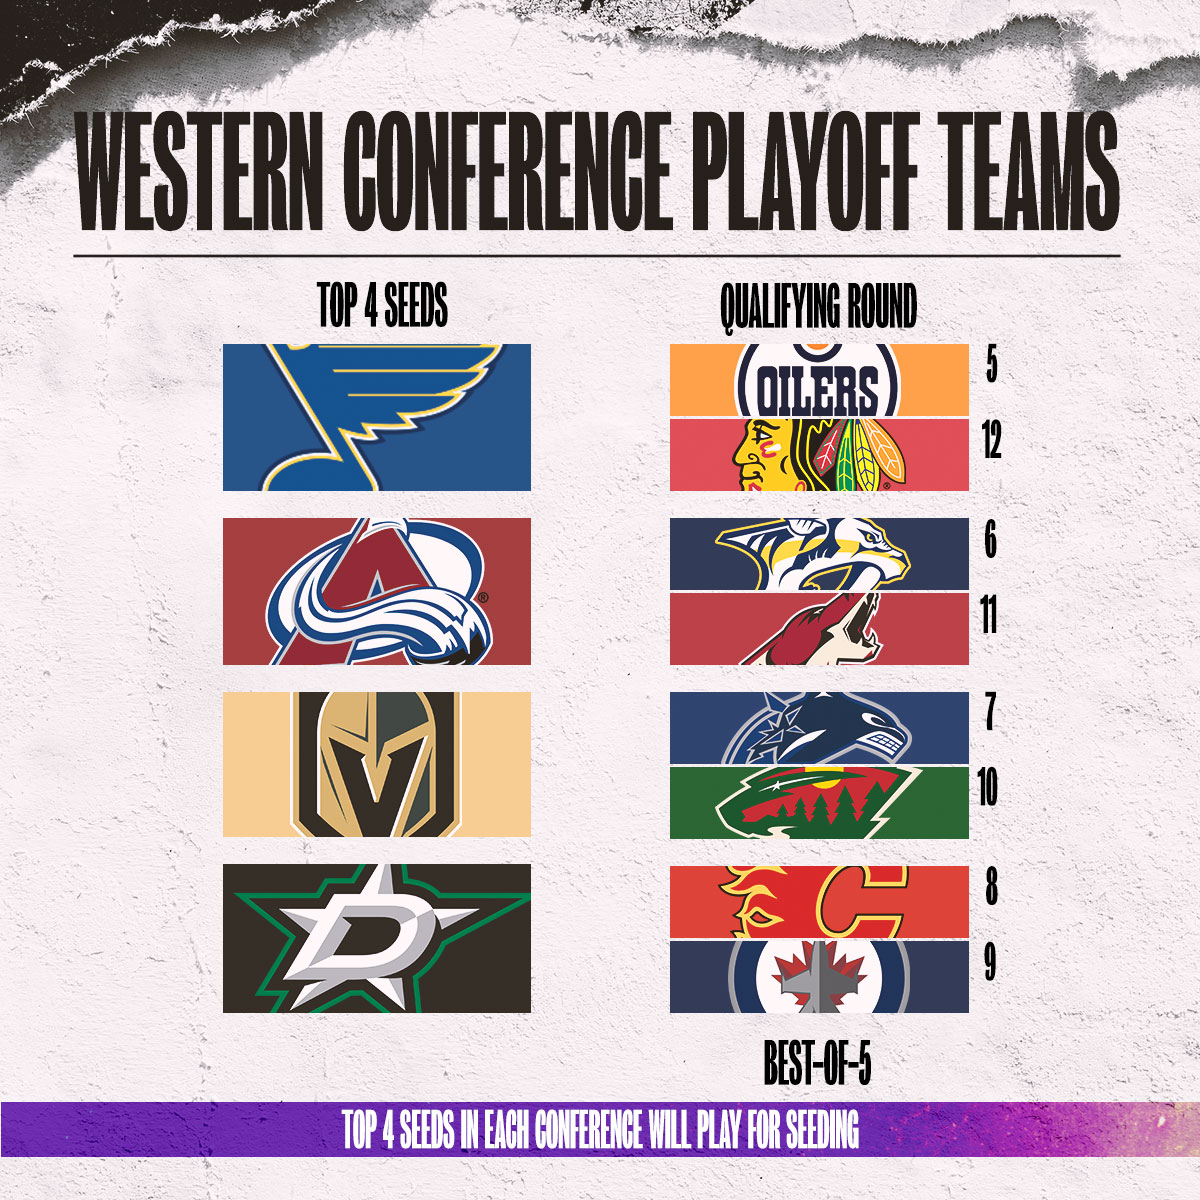 western conference nhl